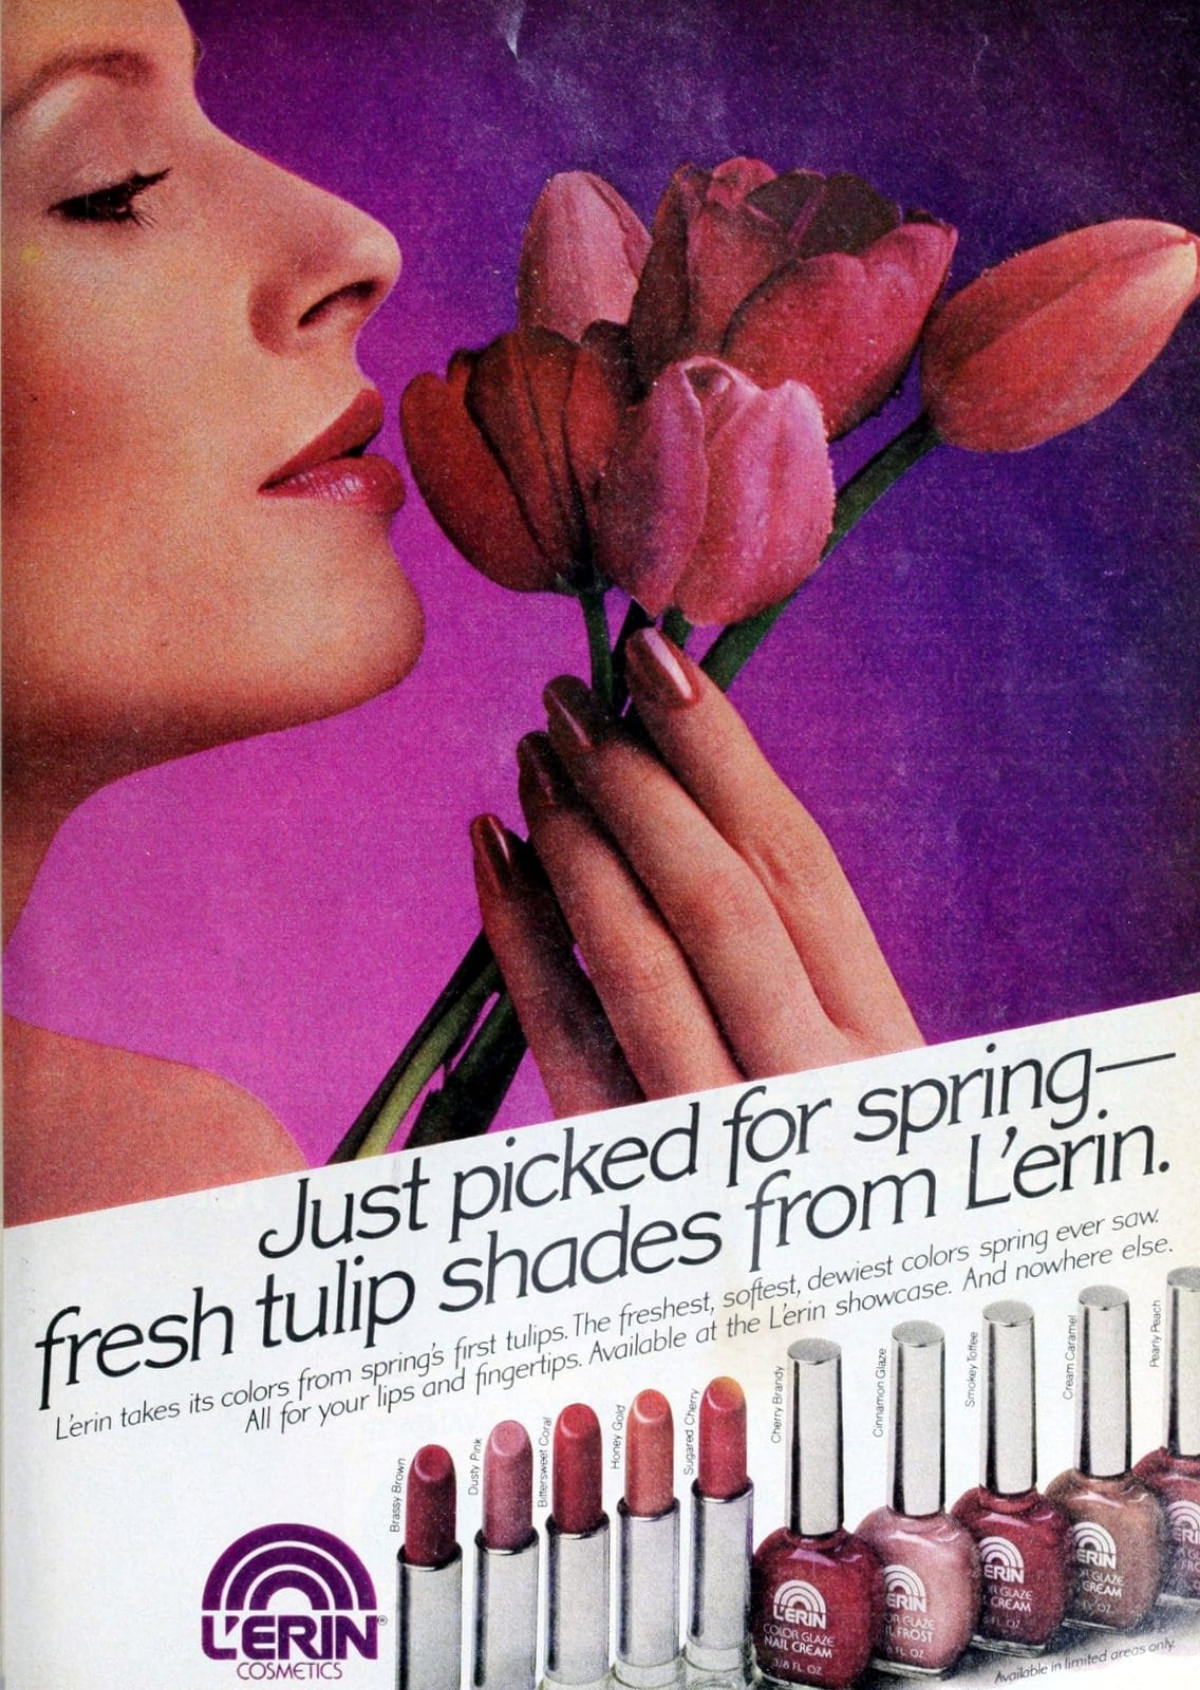 L’erin new spring shades, 1980s.